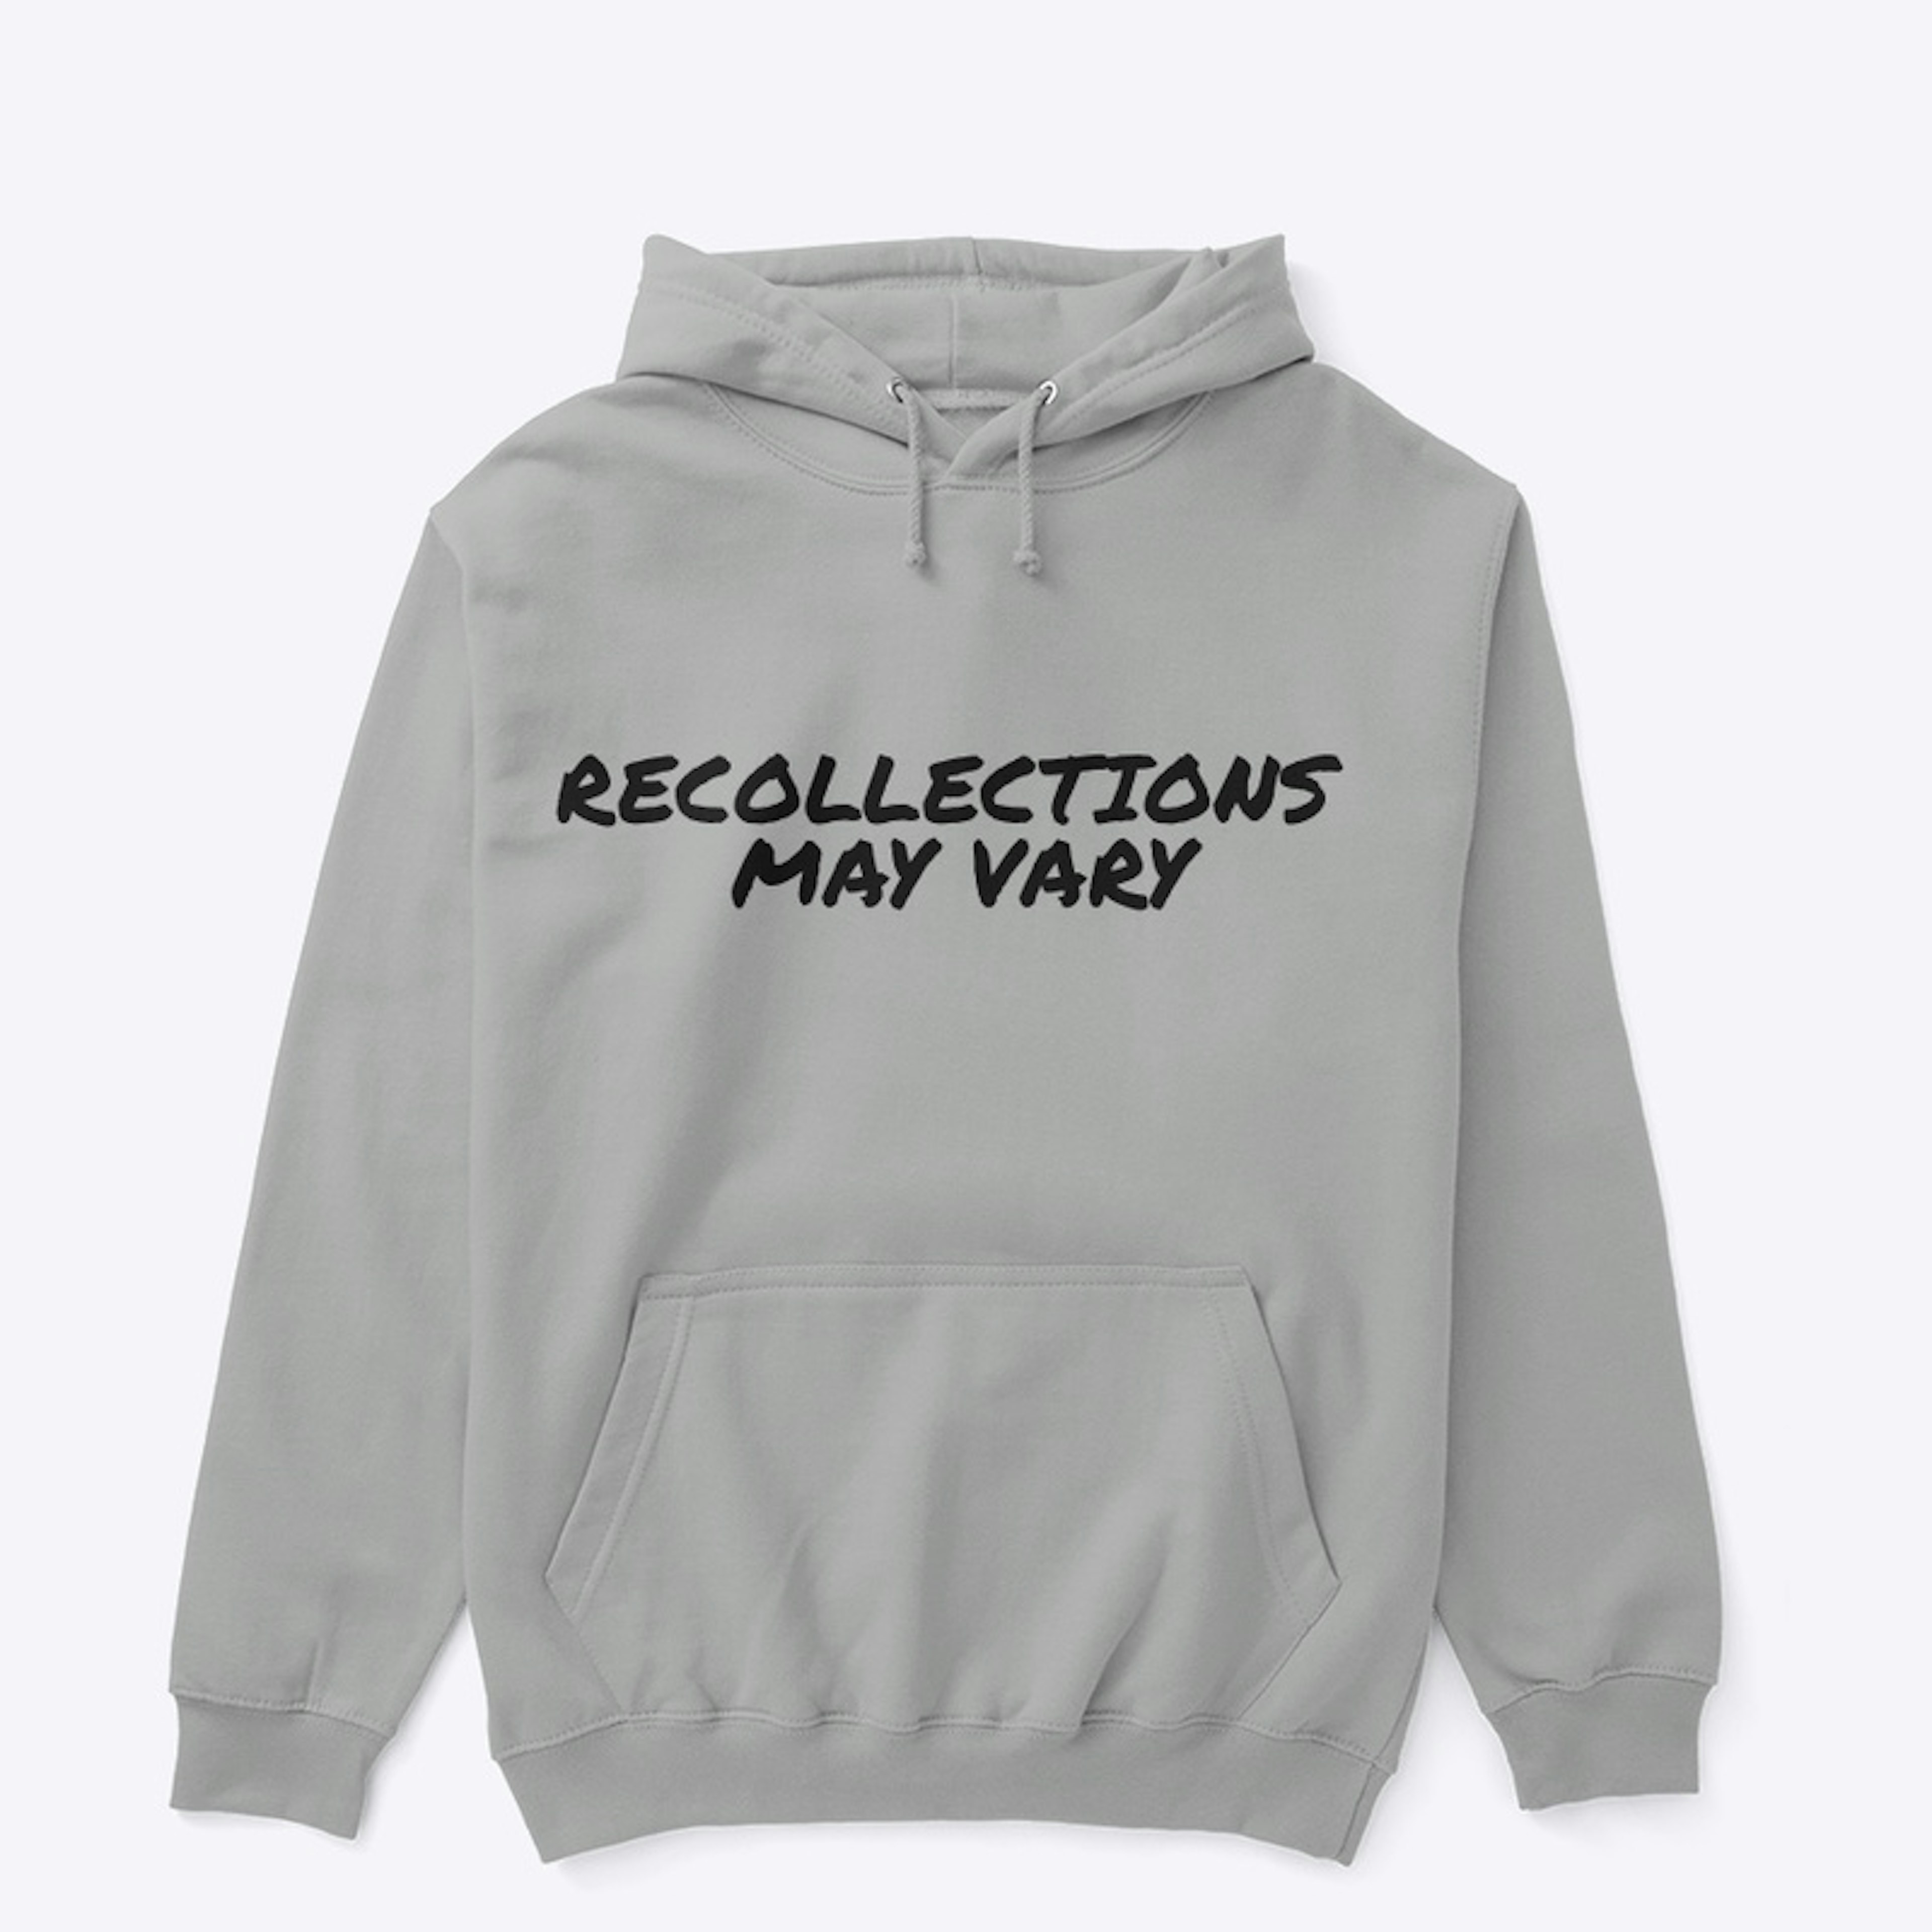 Recollections may vary hoodie